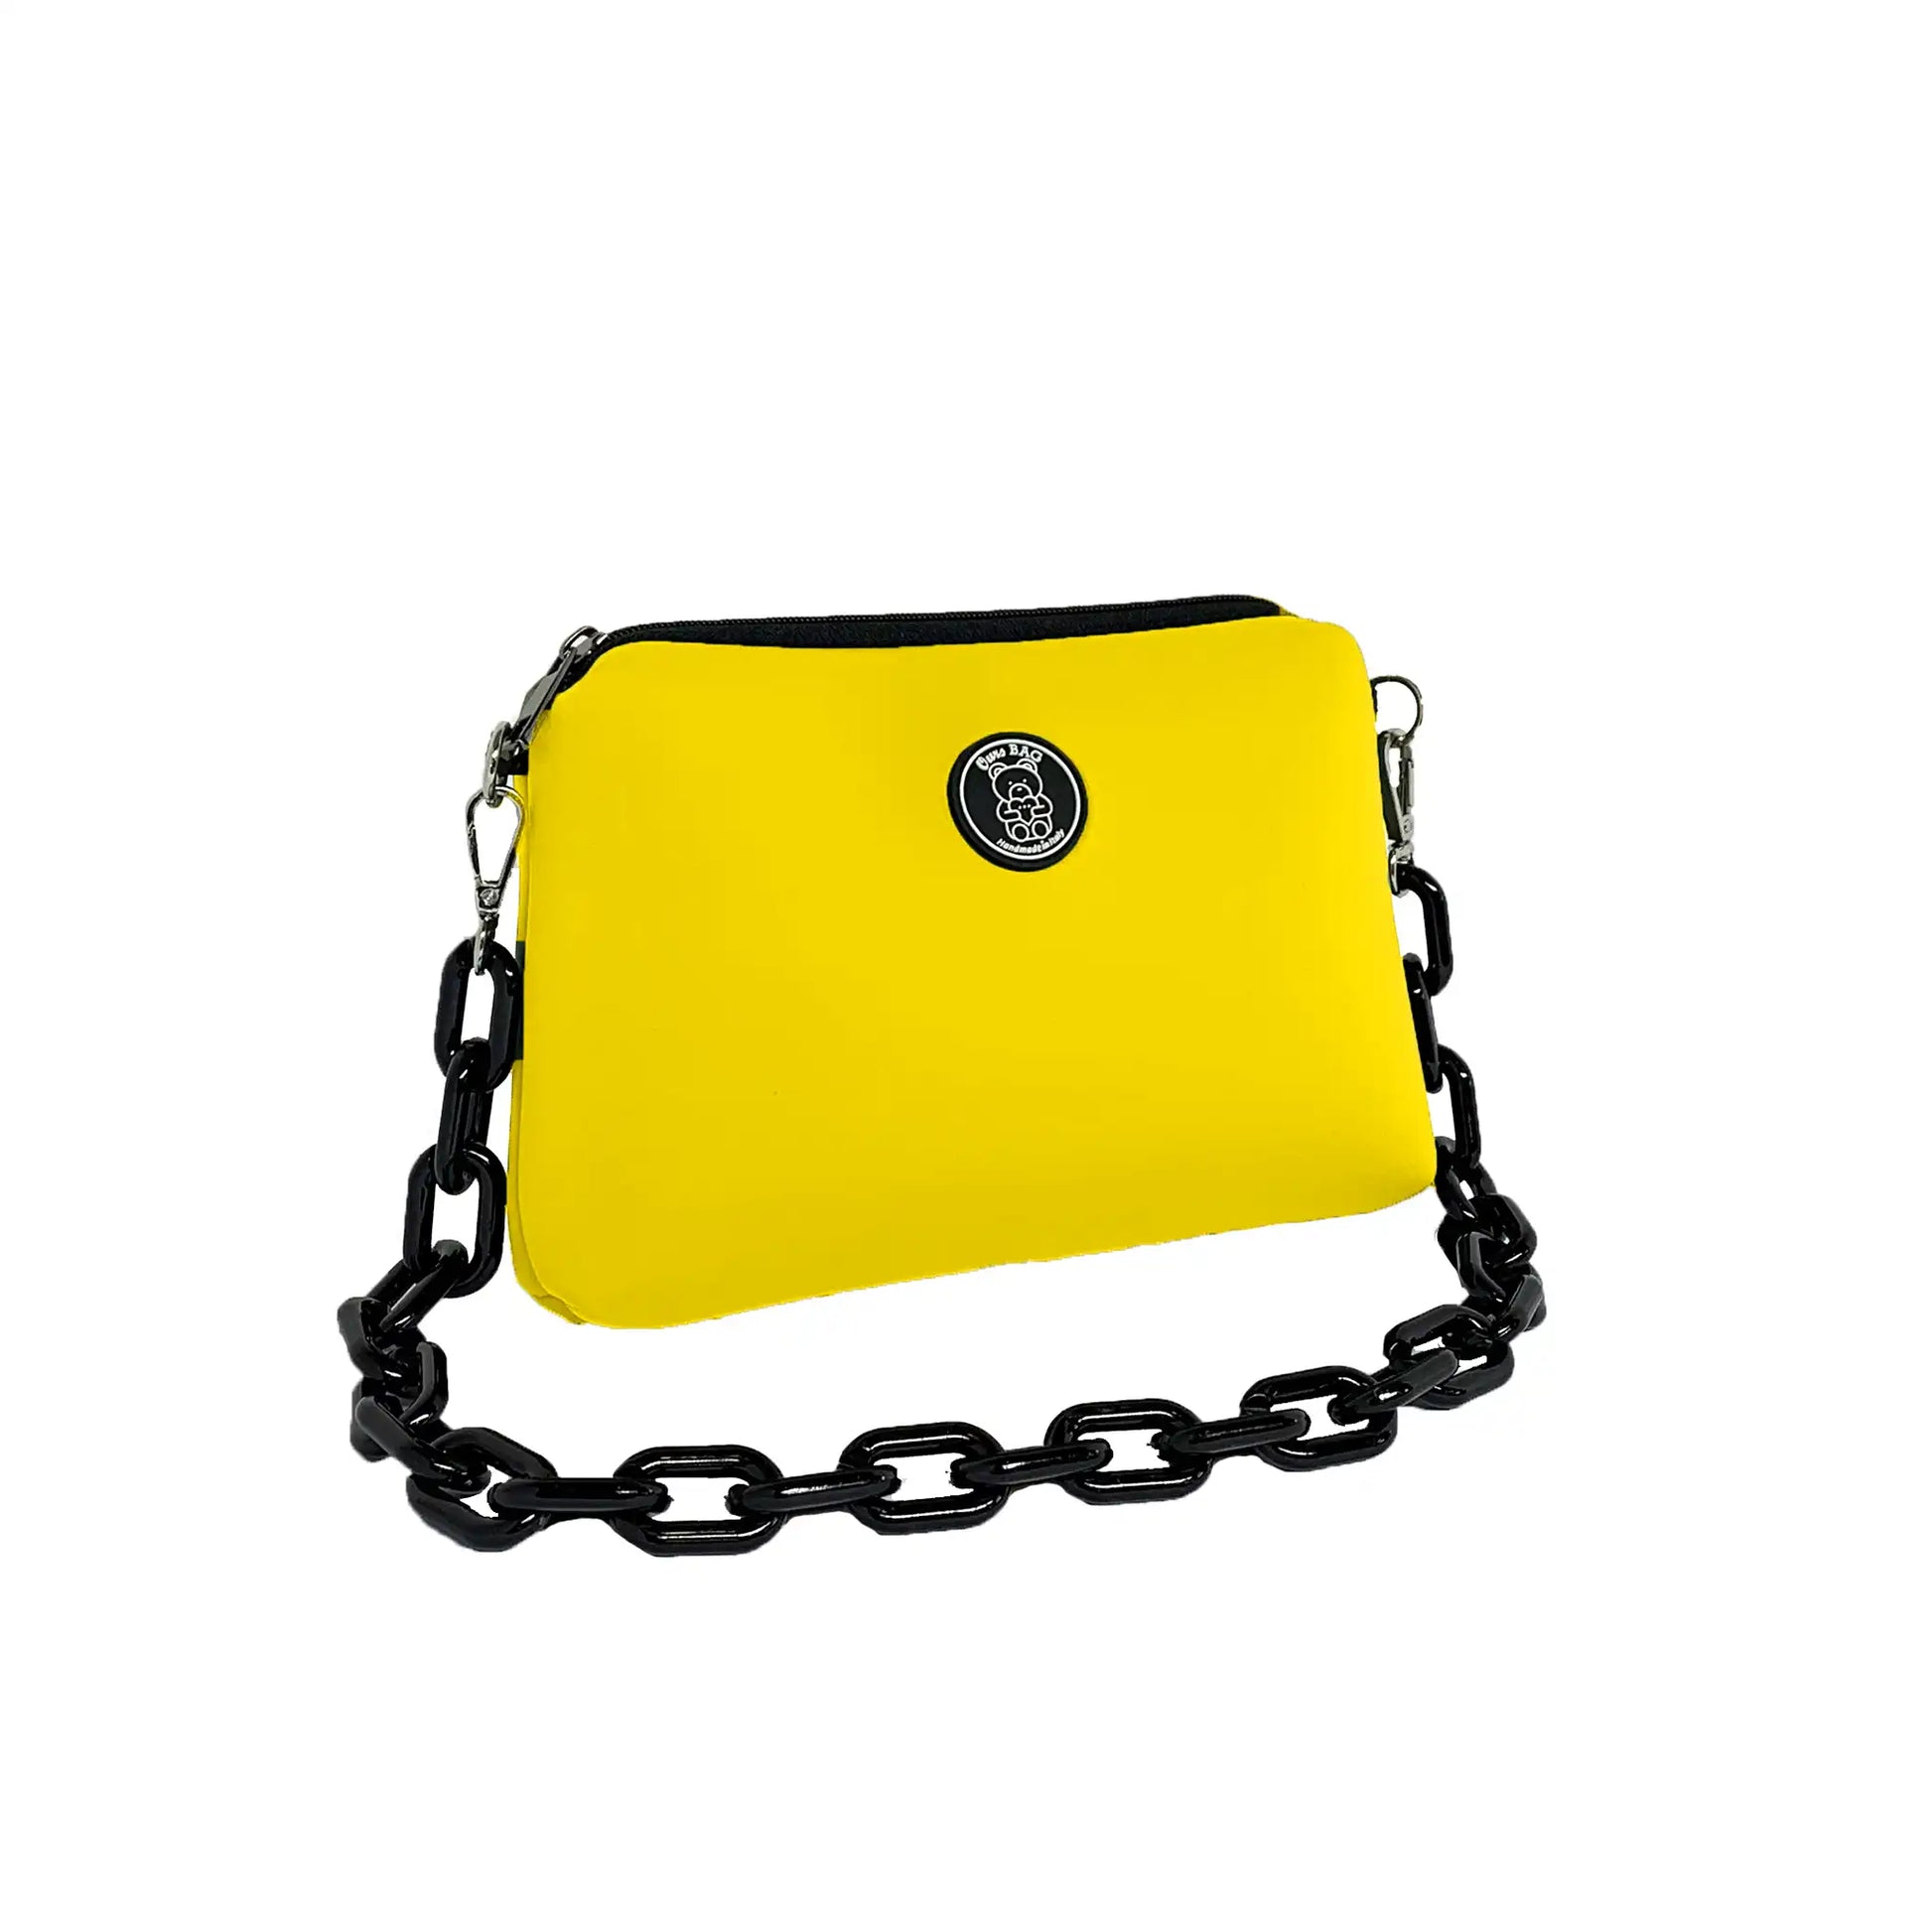 Pochette con Catena (Yellow) by Ours Bag